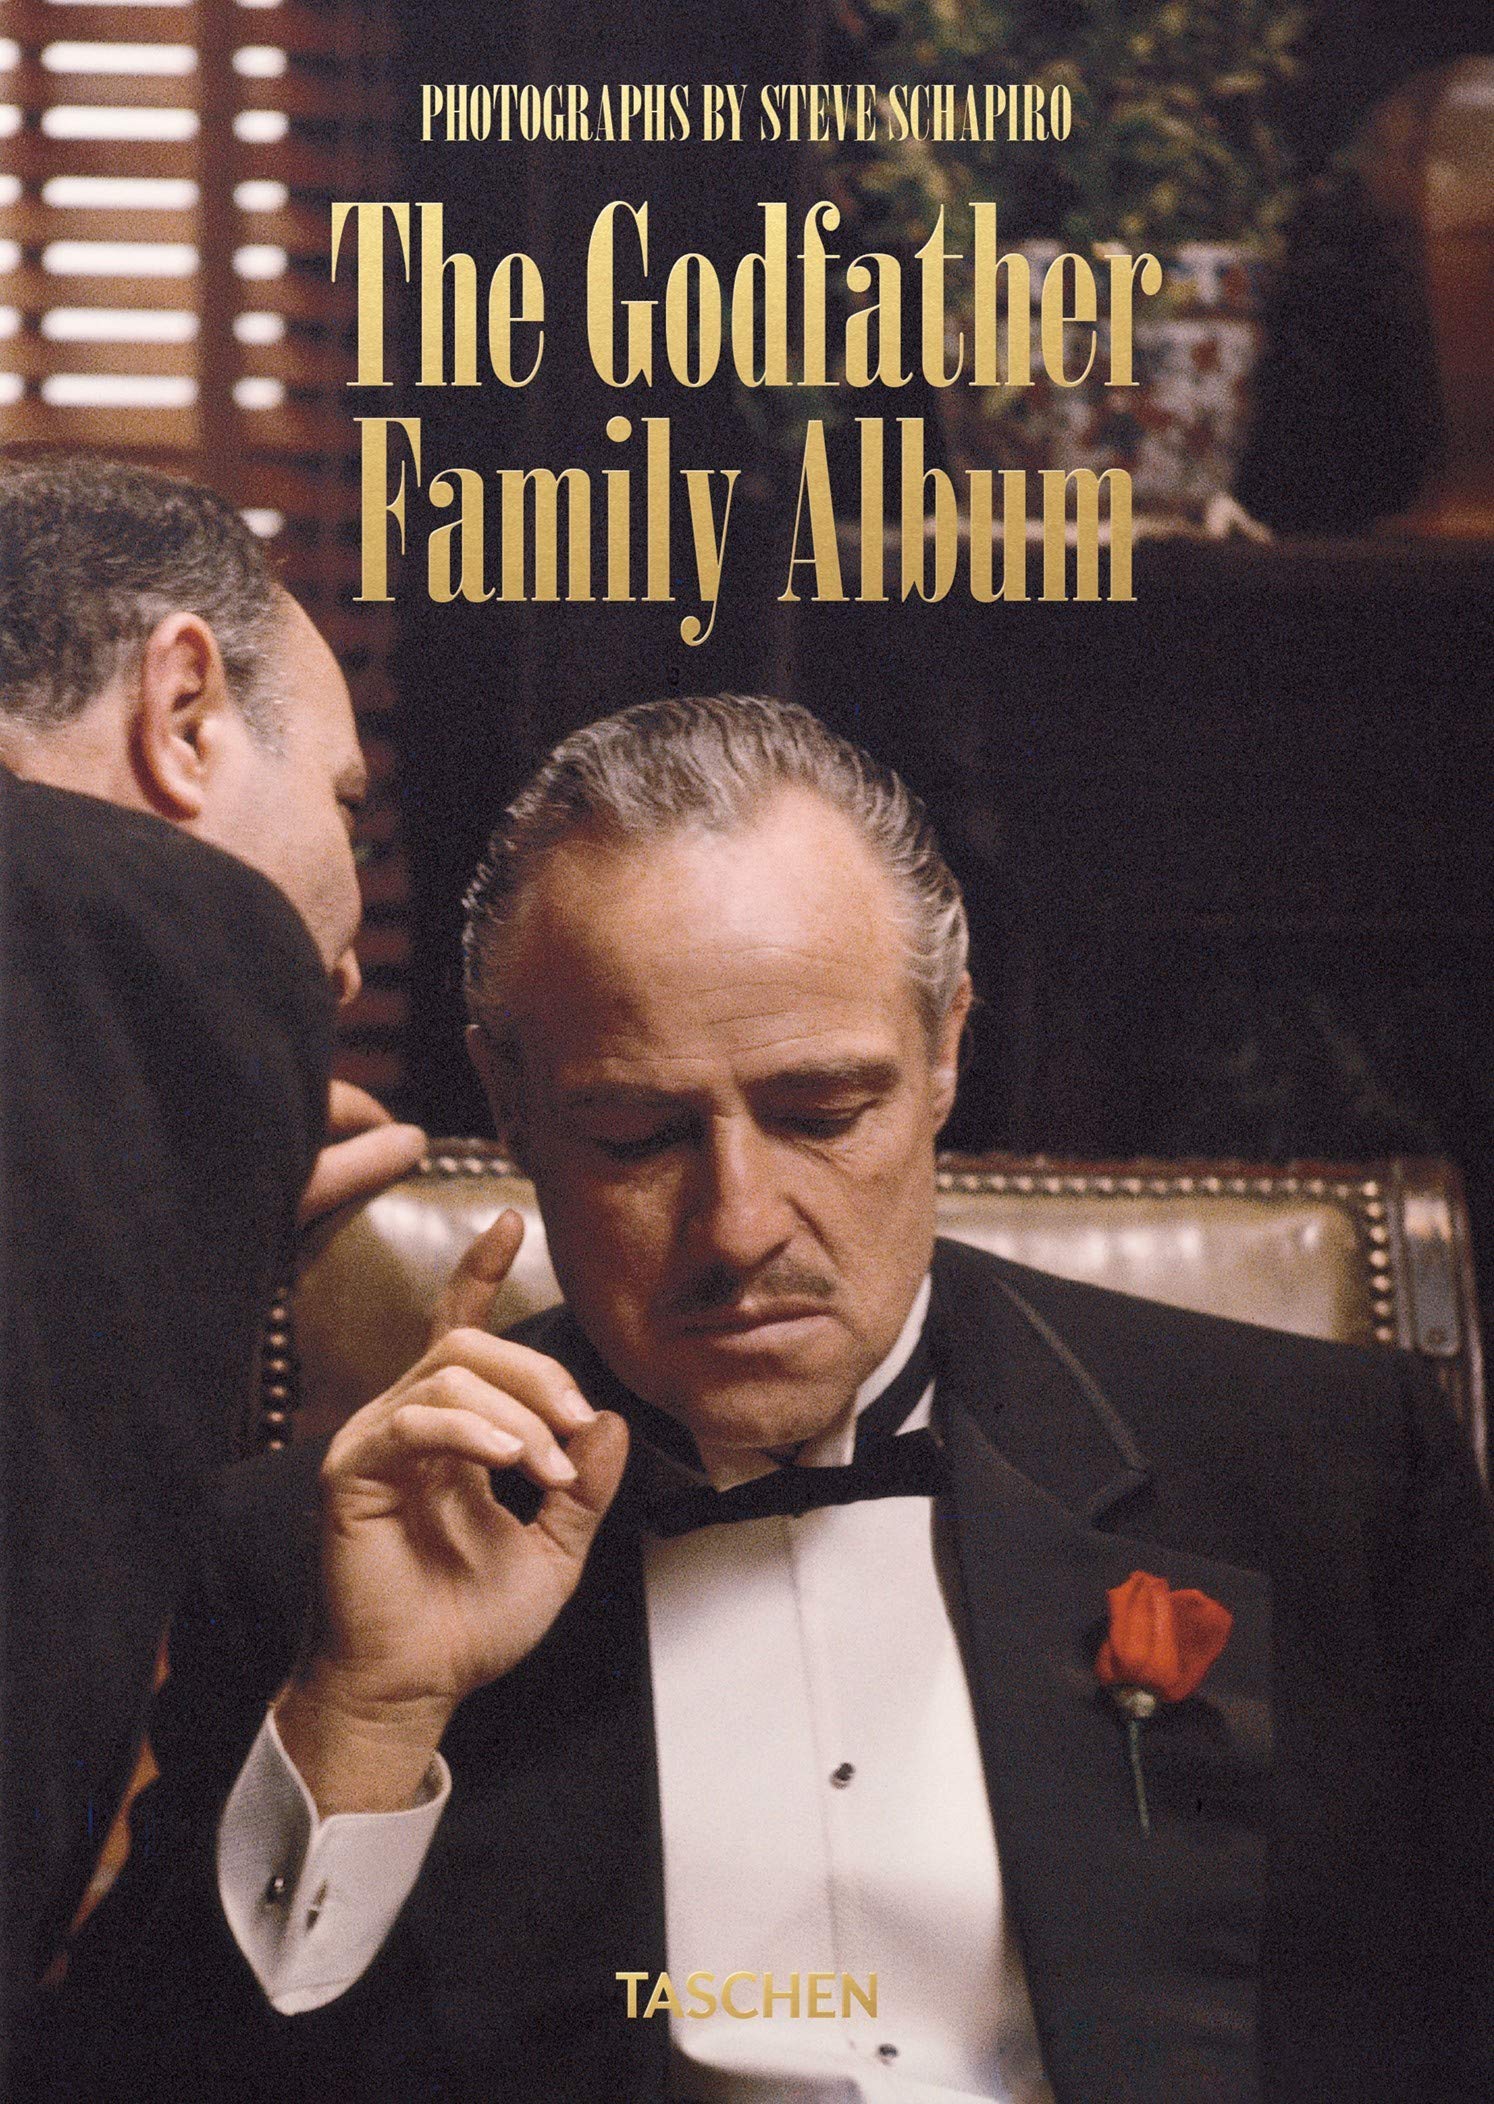 The Godfather Family Album Book – 40th Anniversary Edition